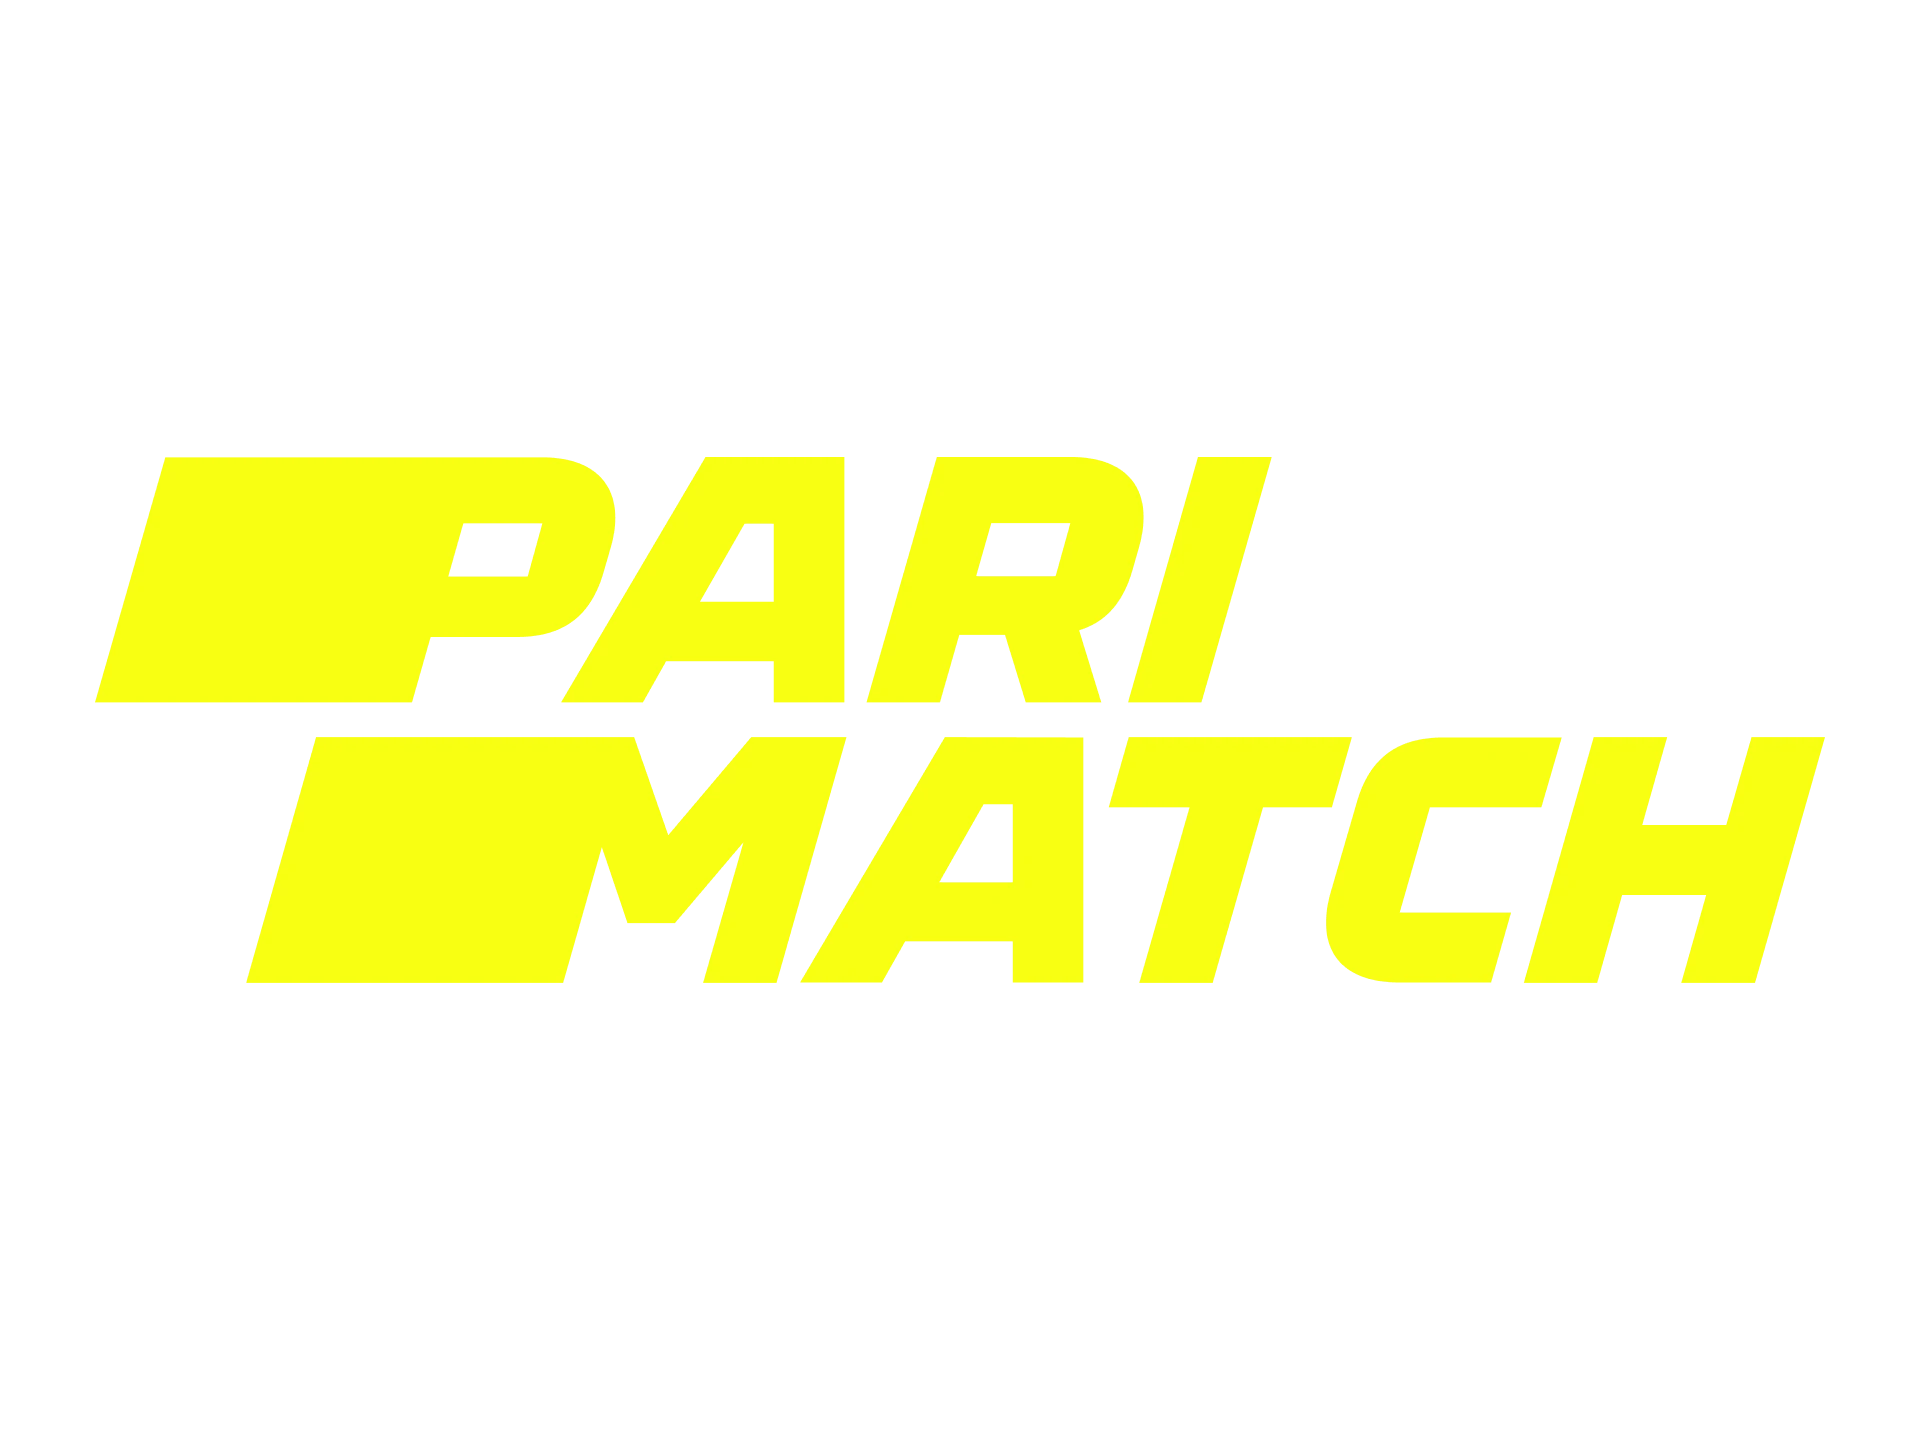 Place bets on cricket using the Parimatch app.